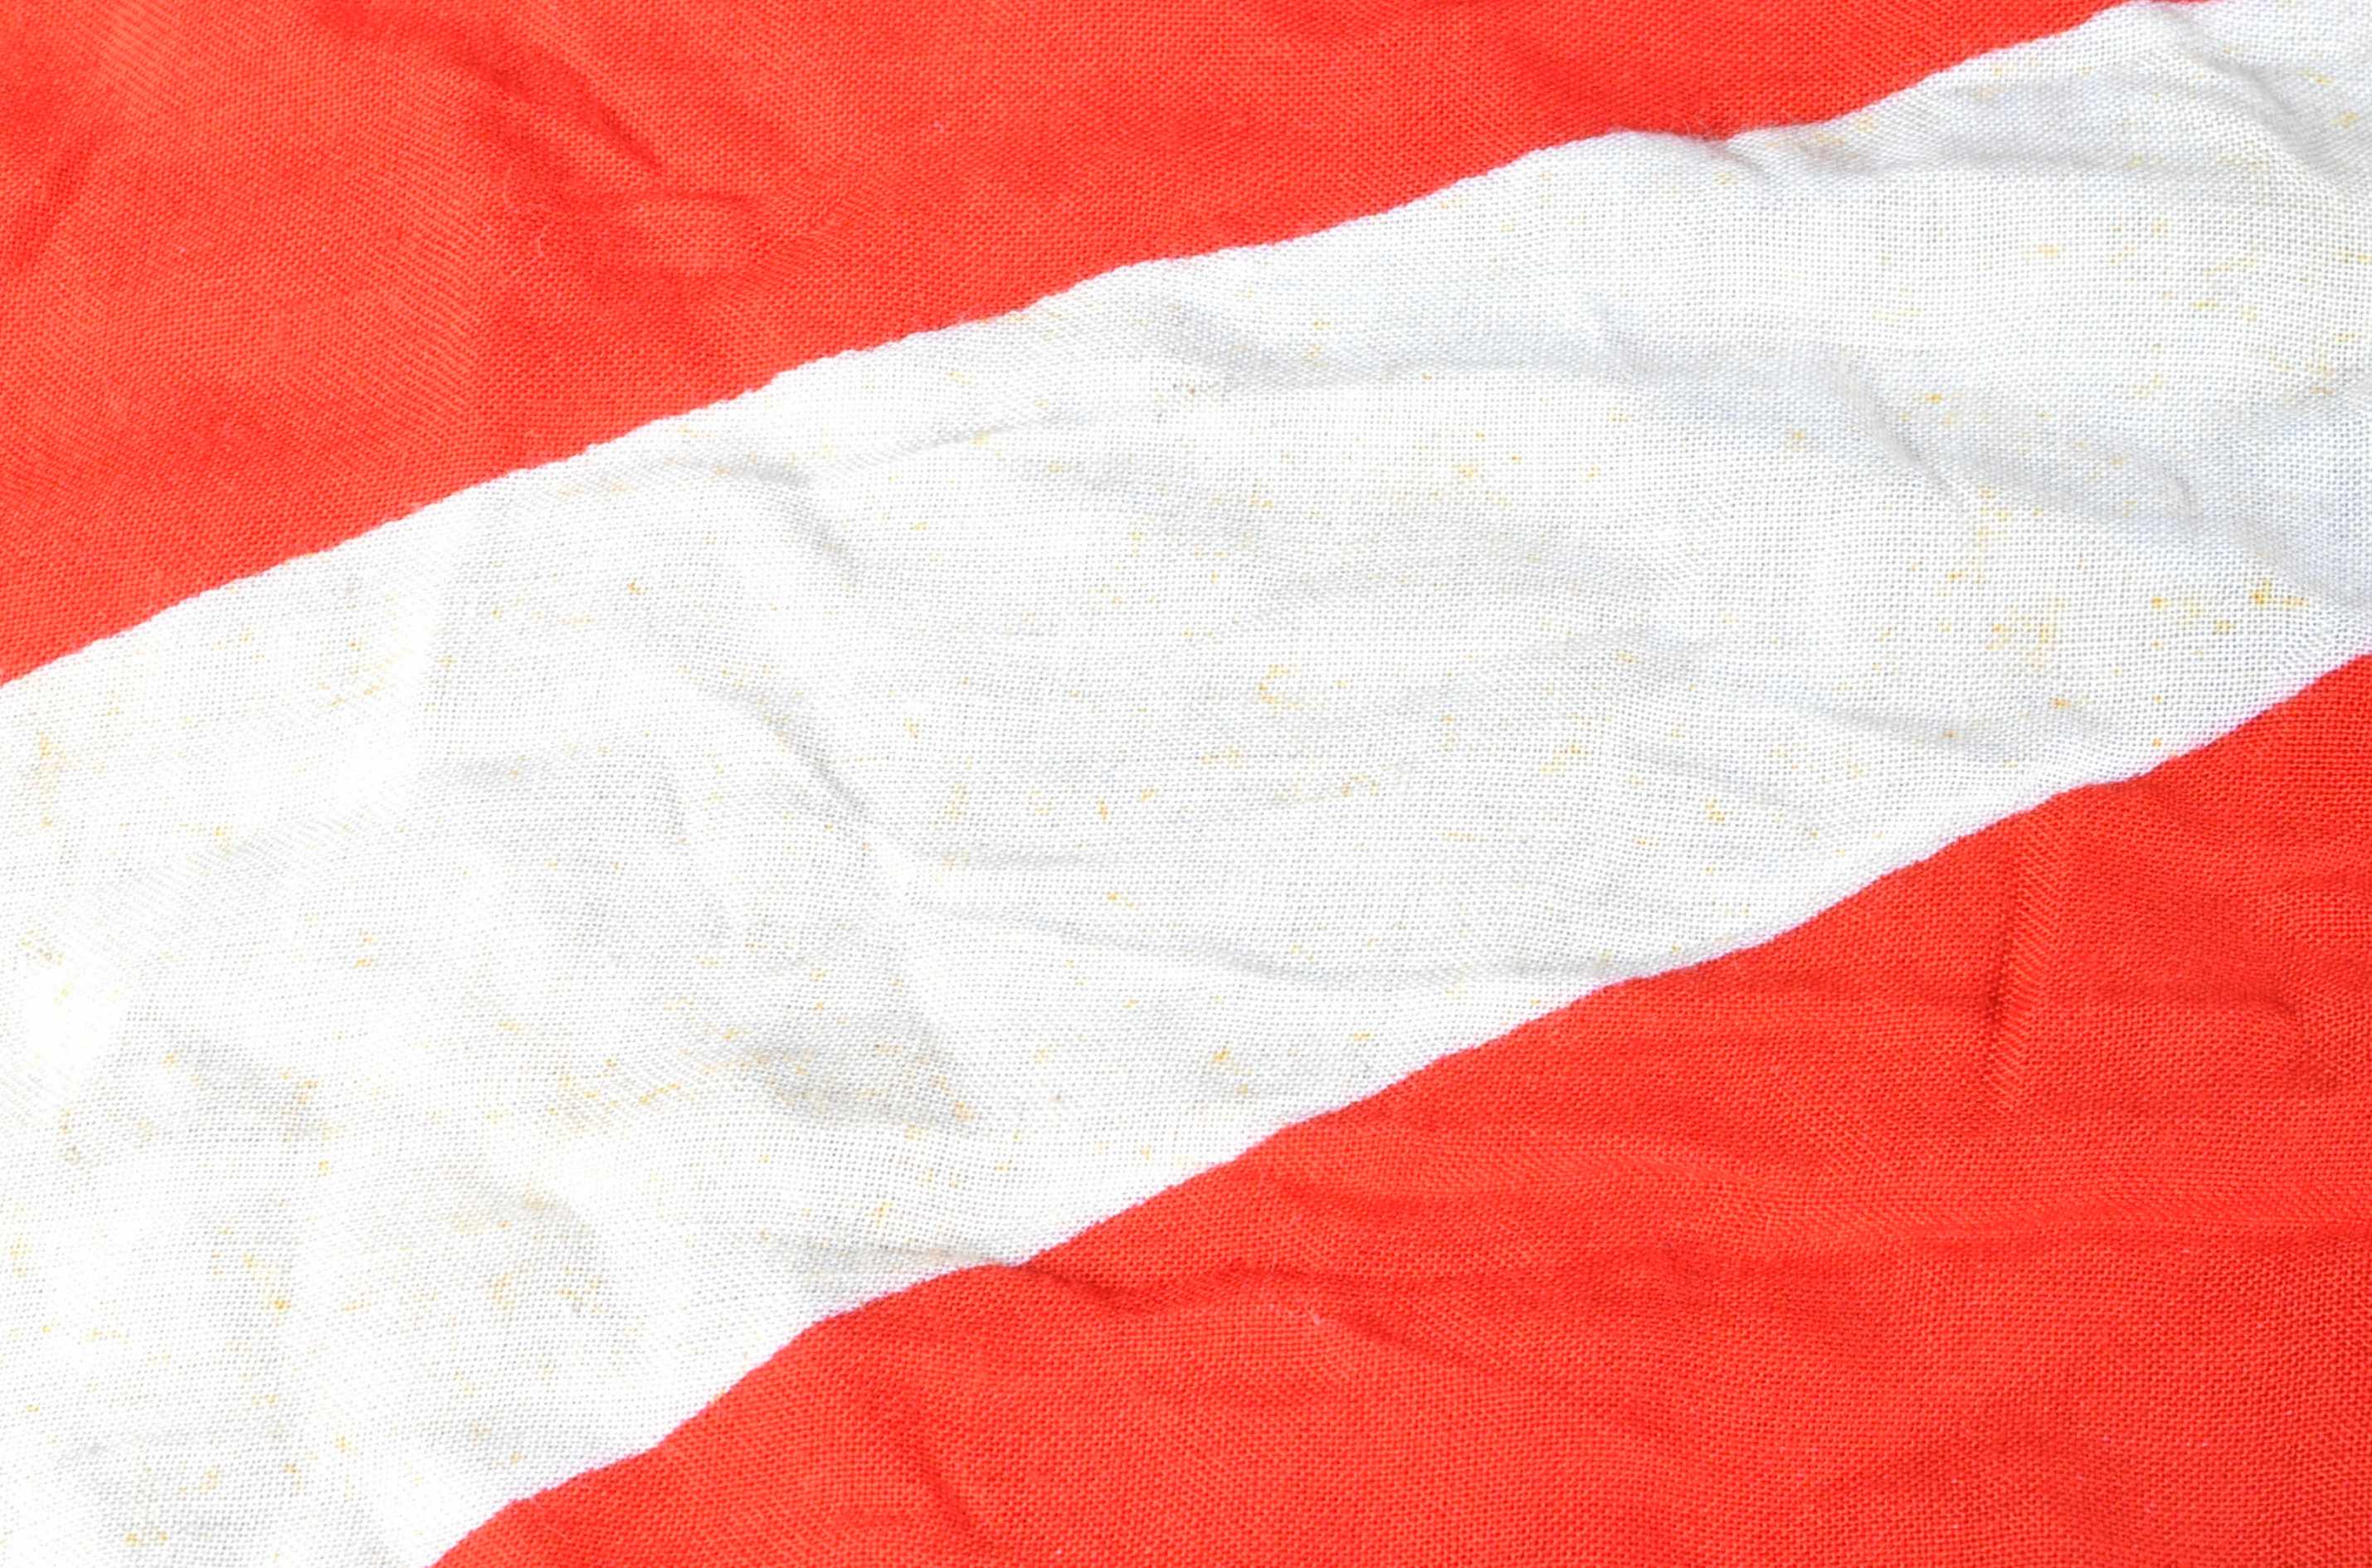 WWII SECOND WORLD WAR PERIOD IMPERIAL JAPANESE FLAG - Image 5 of 7